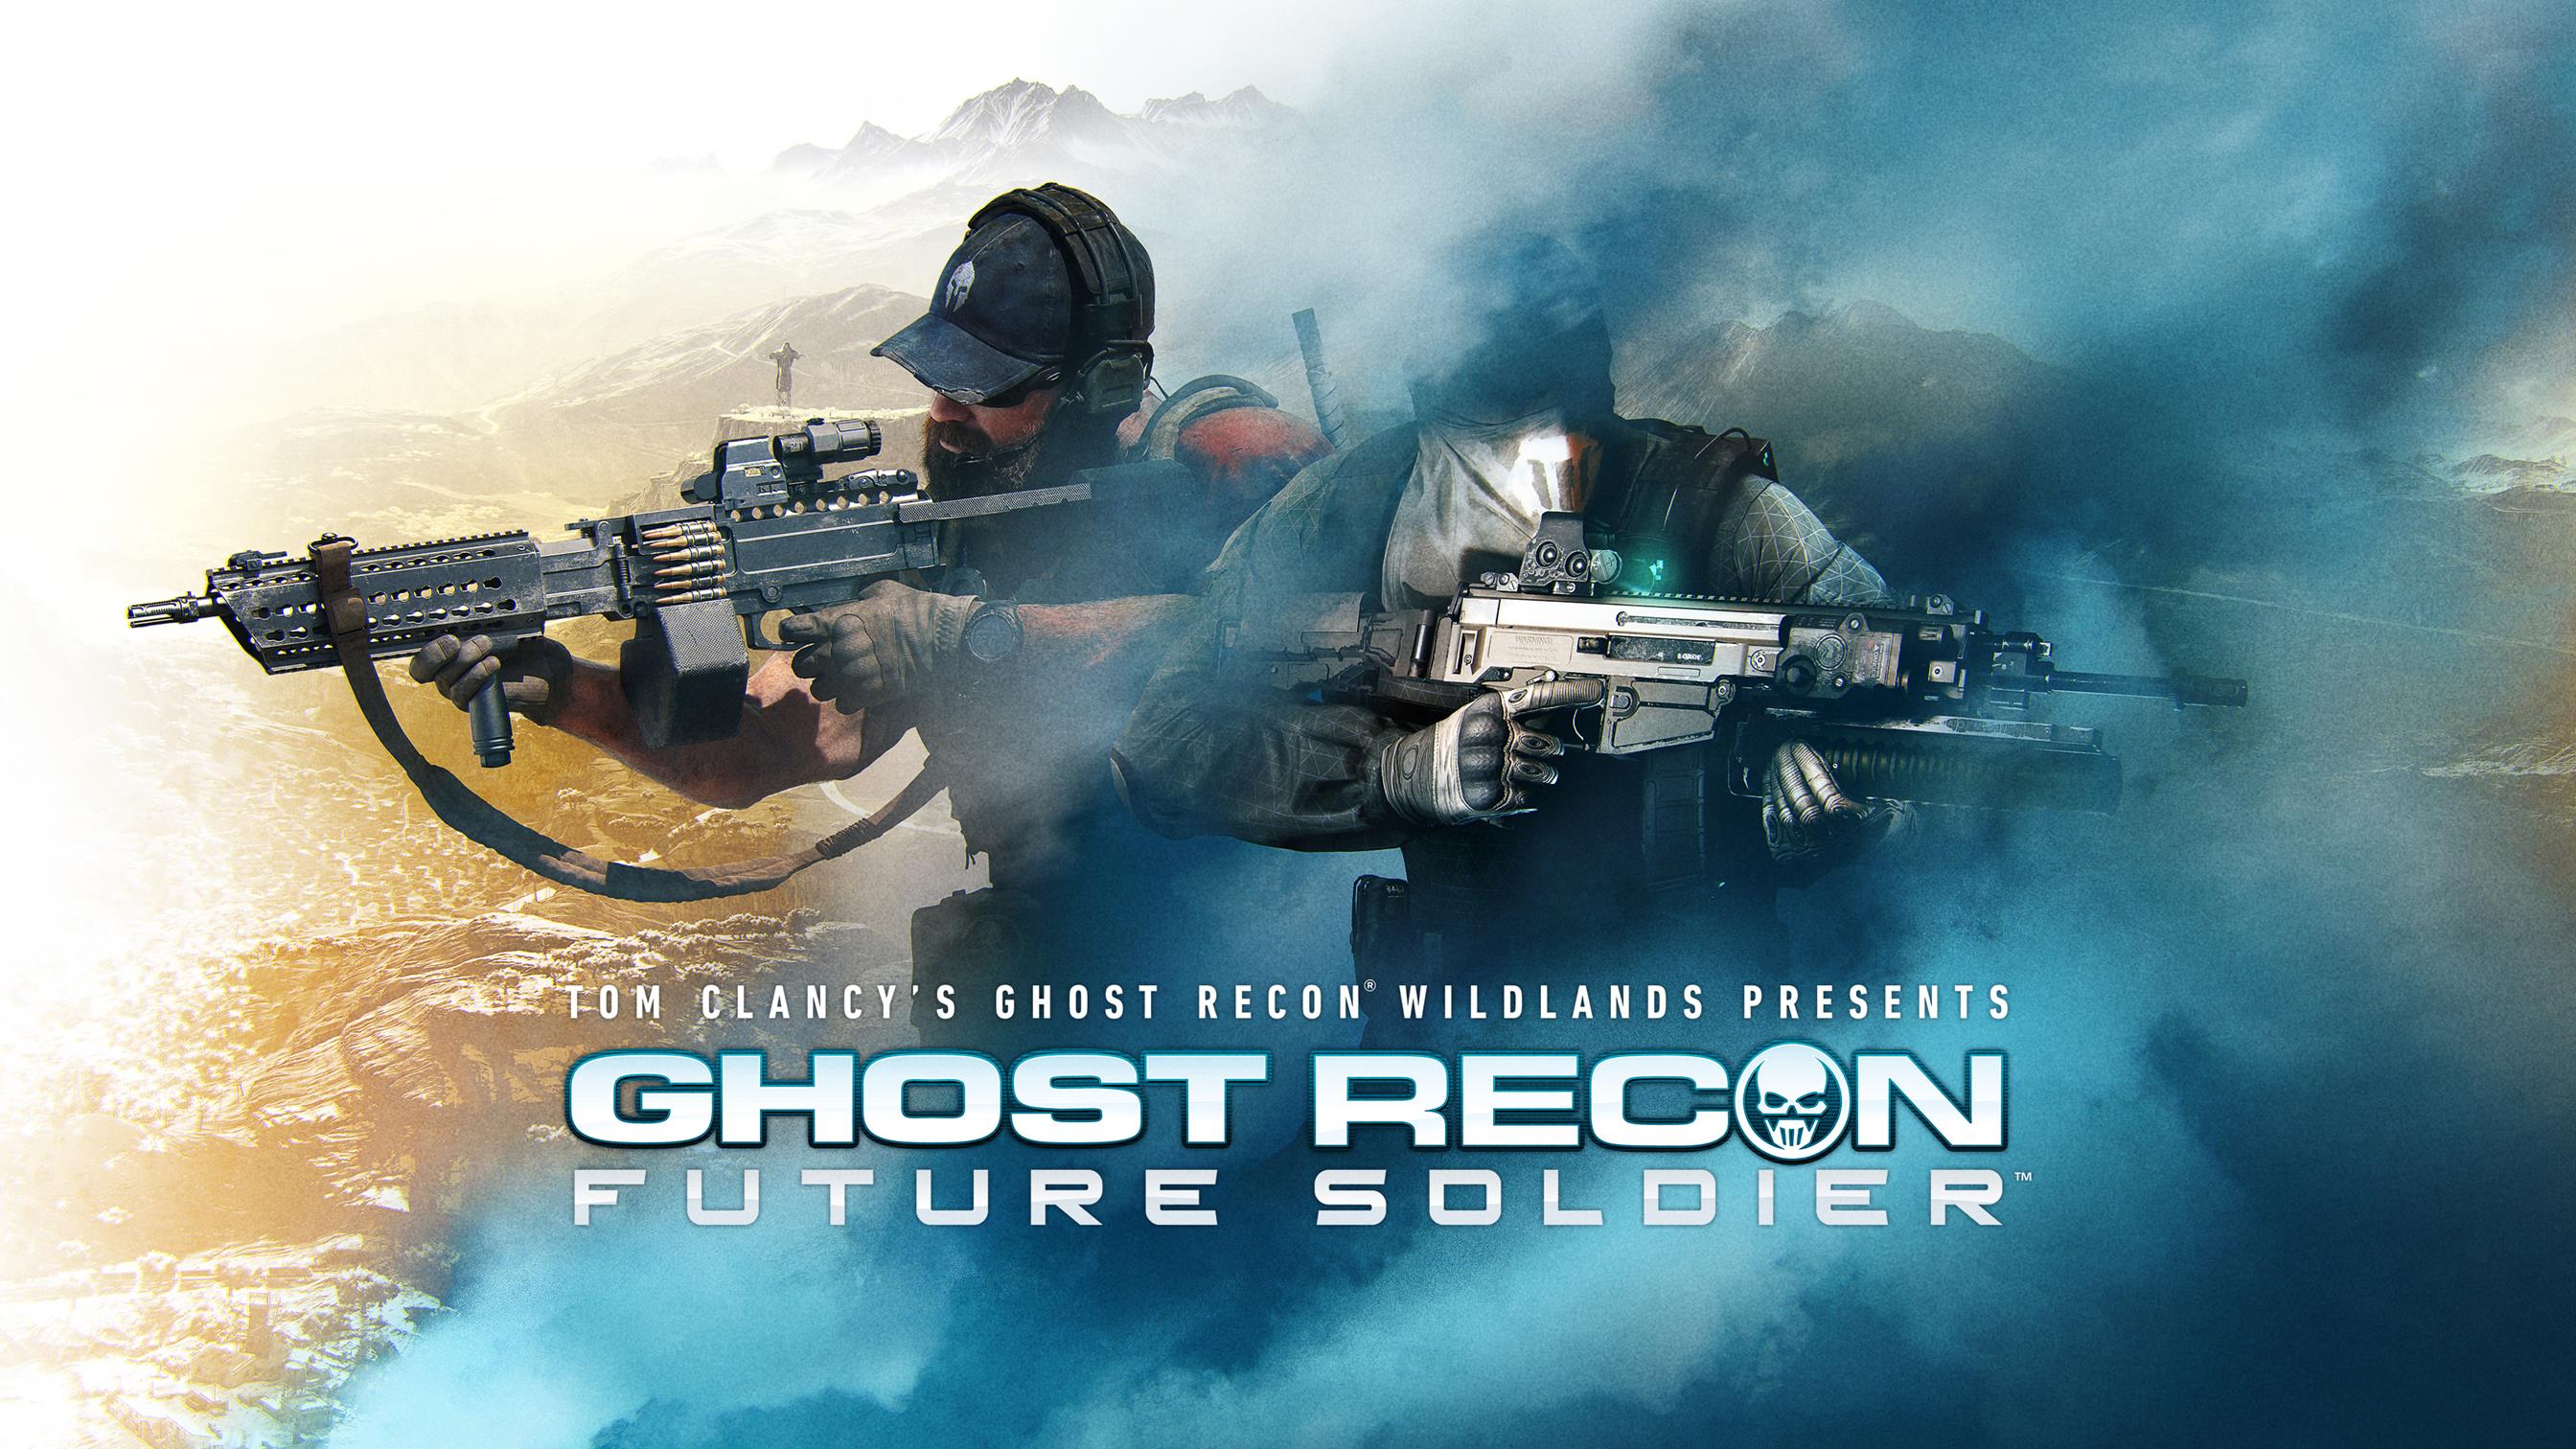 Image for Ghost Recon Wildlands gets Future Soldier-inspired mission, new PvP maps and classes, more